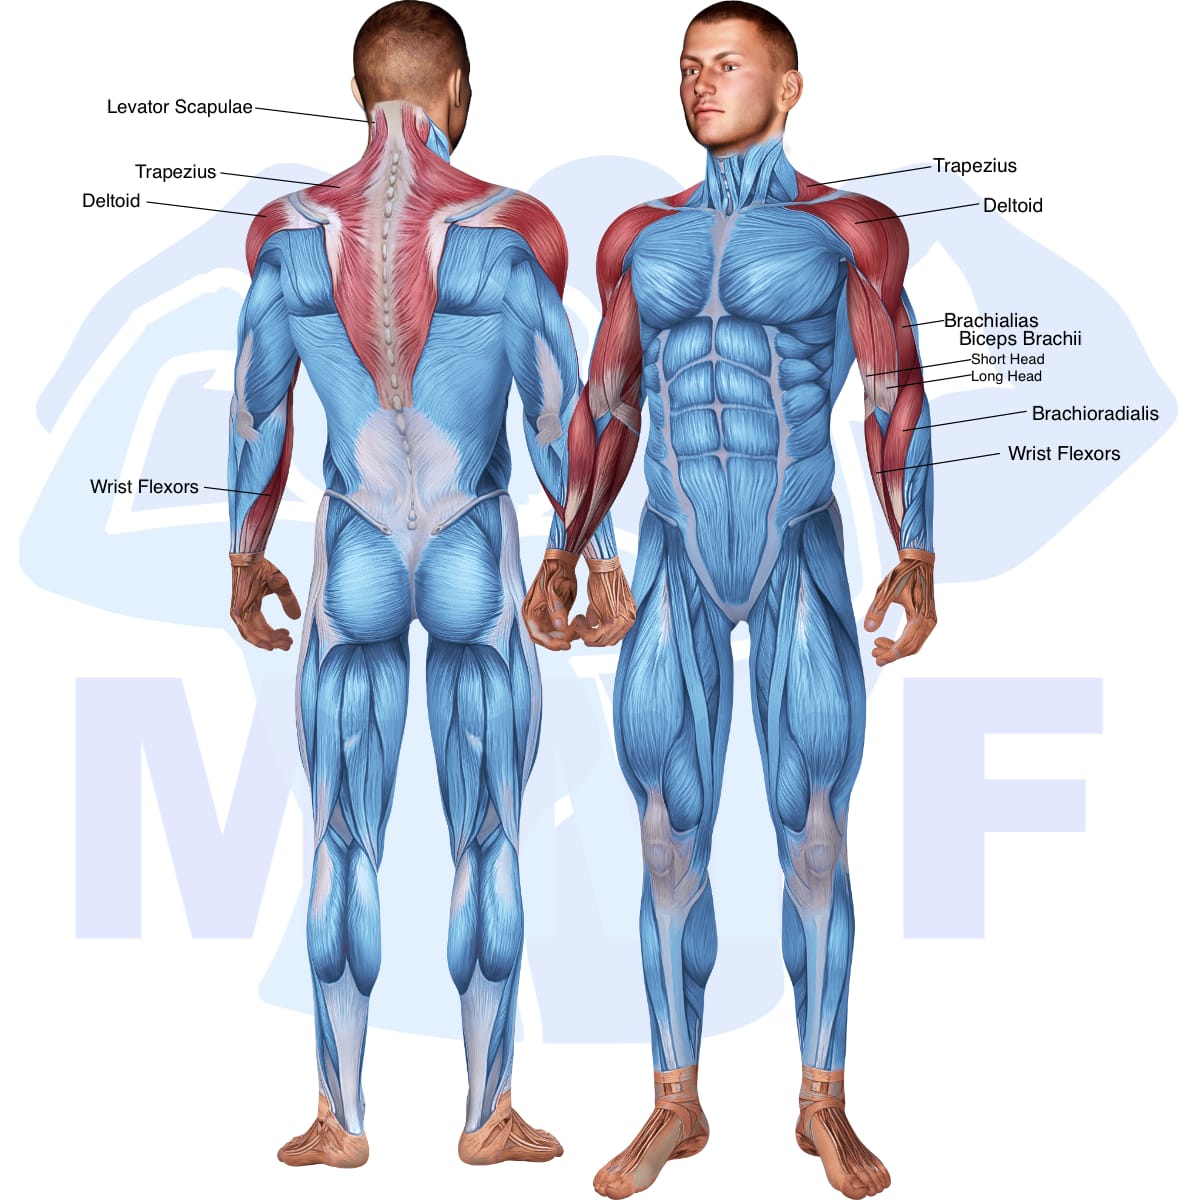 Image of the skeletal muscular system with the muscles used in the dumbbell concentration curl exercise highlighted in red and the rest in blue.